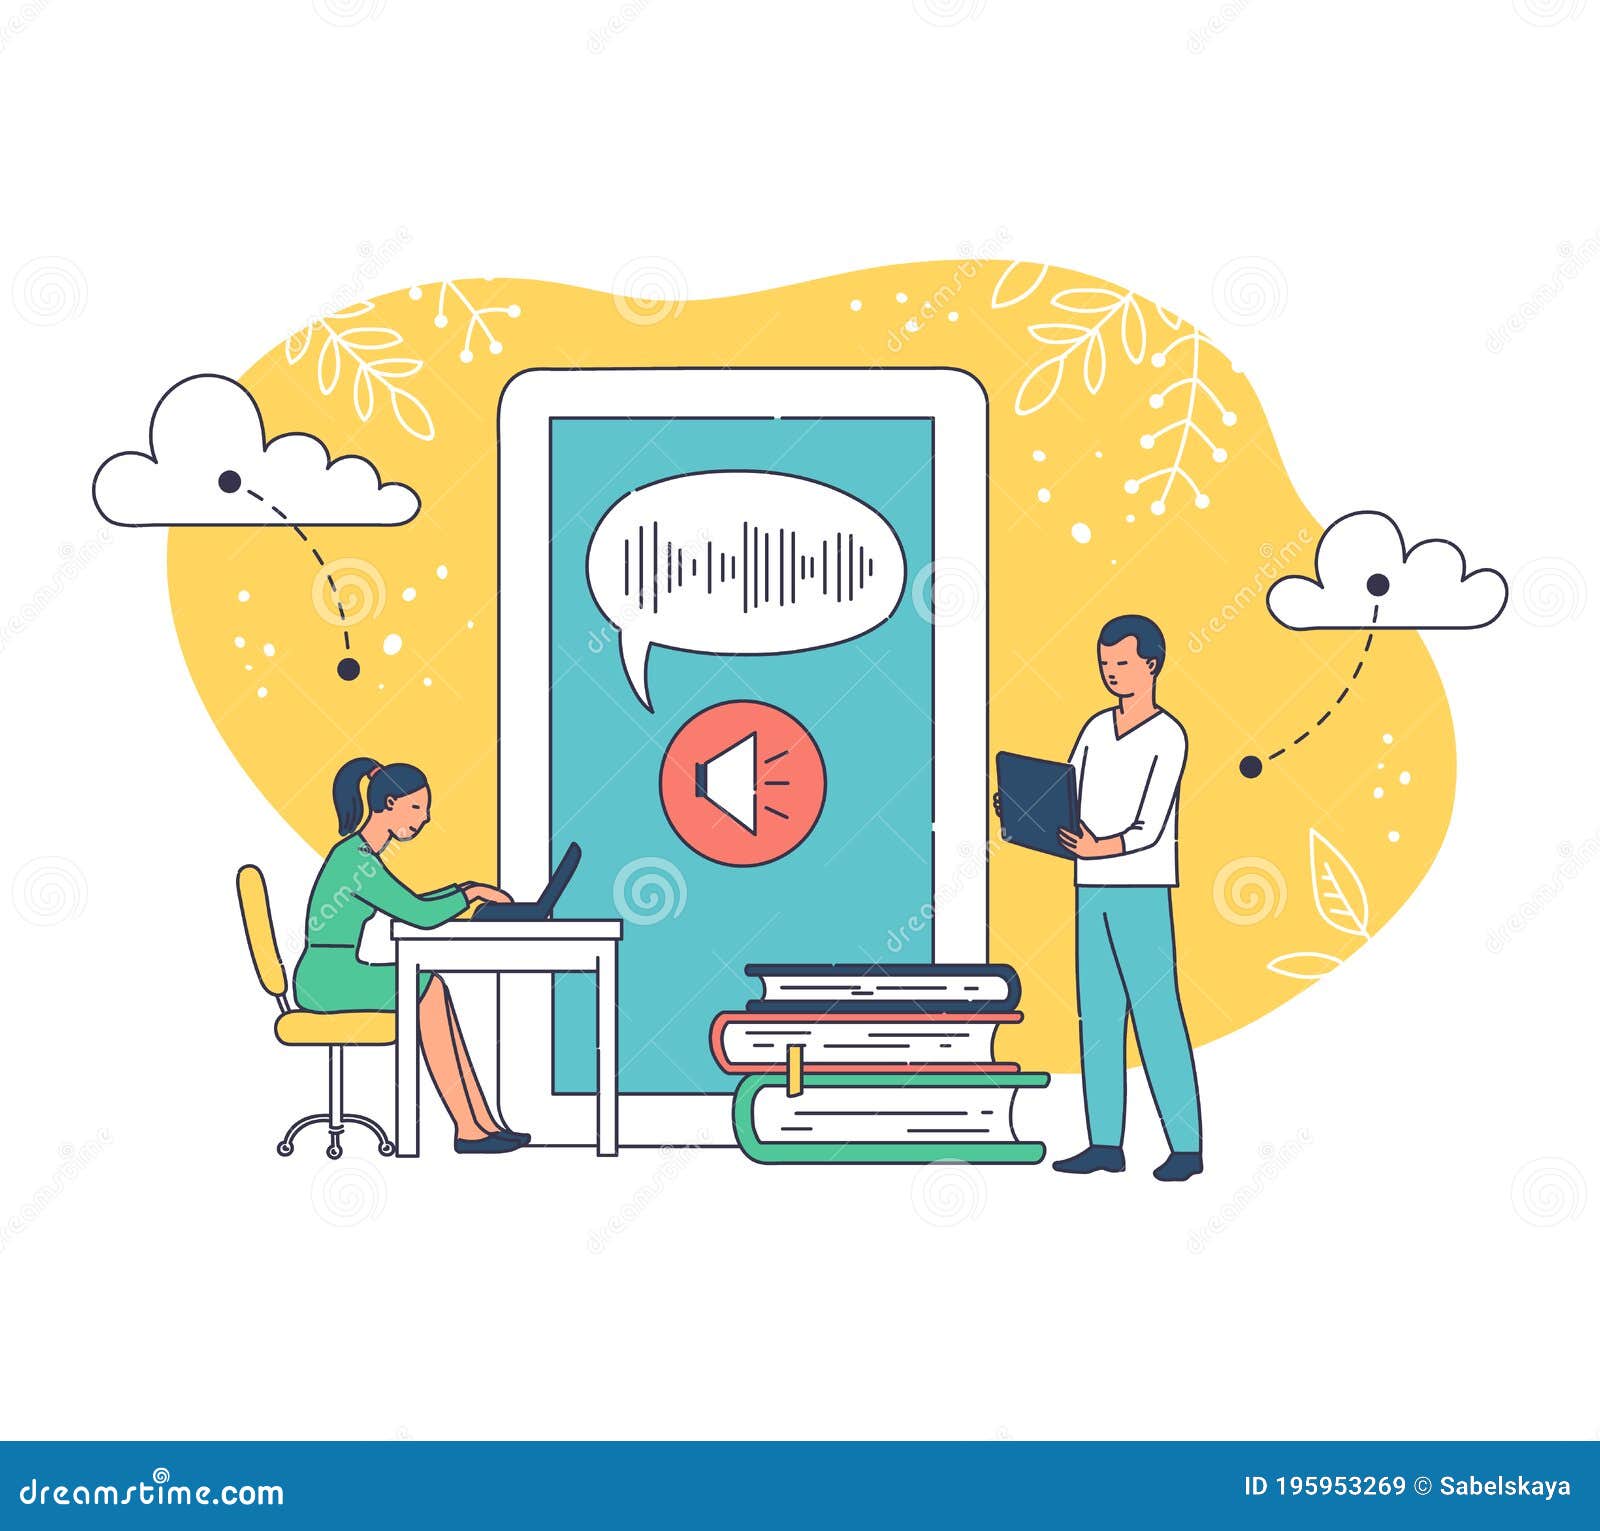 Online Education Poster Concept with Cartoon People Learning on Devices  Stock Vector - Illustration of tablet, internet: 195953269